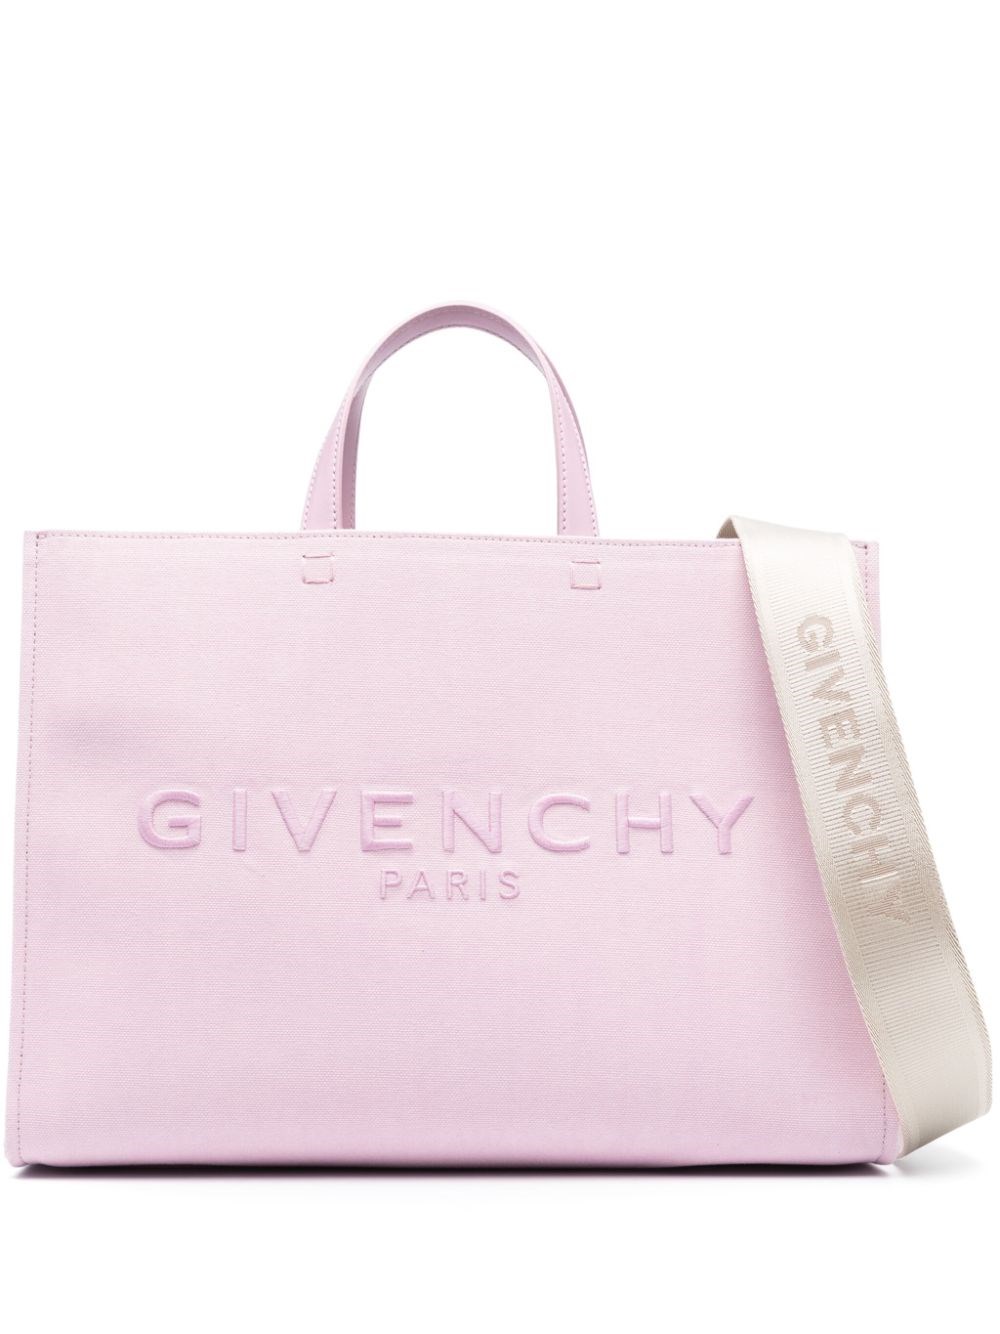 Givenchy Tote Bag  In Pink